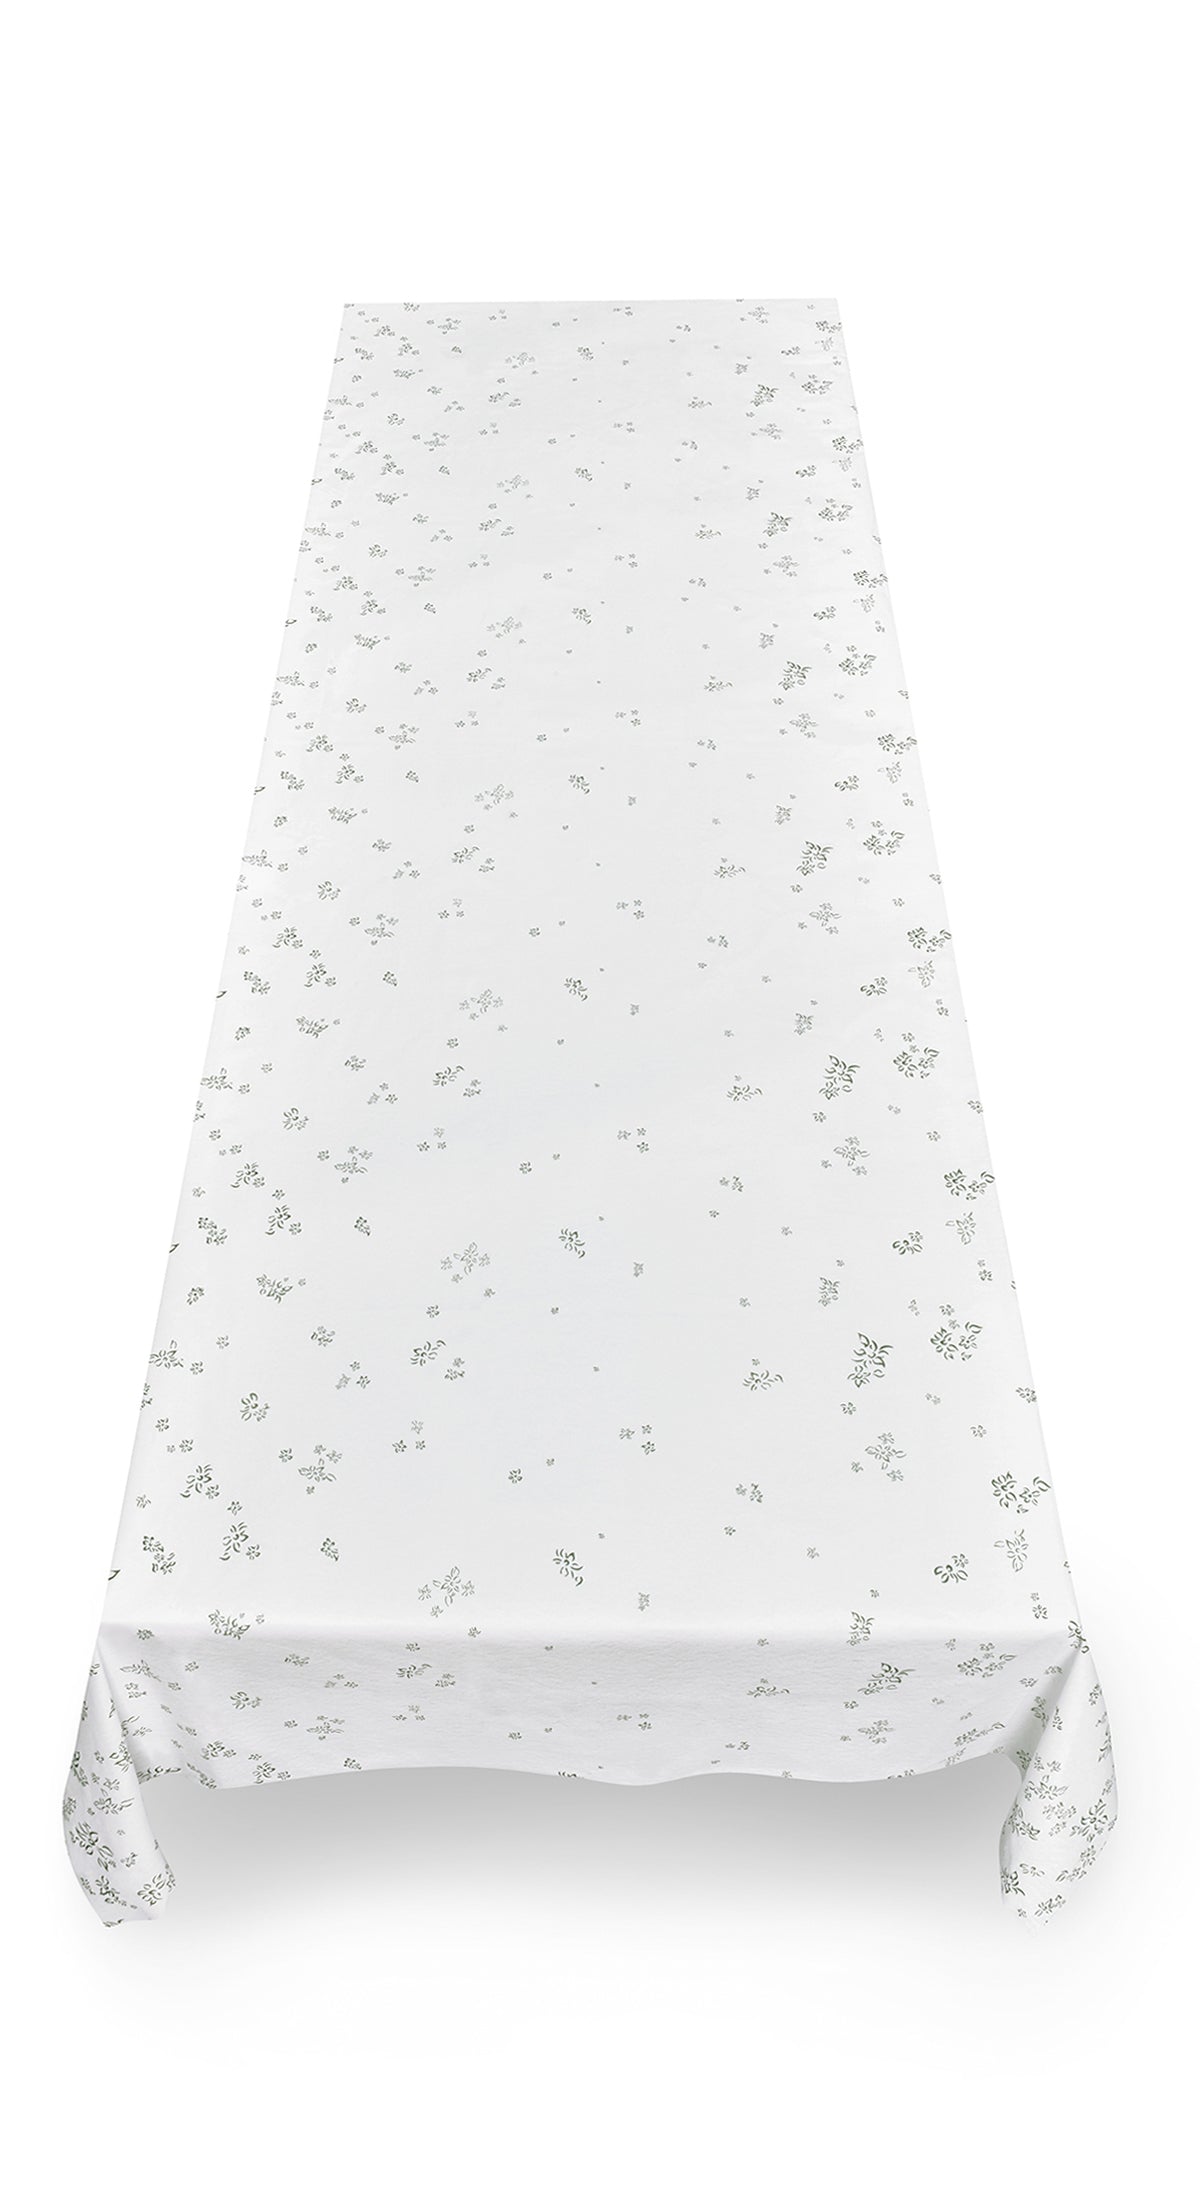 Party Pack - Set of Ten S&B Paper Tablecloths